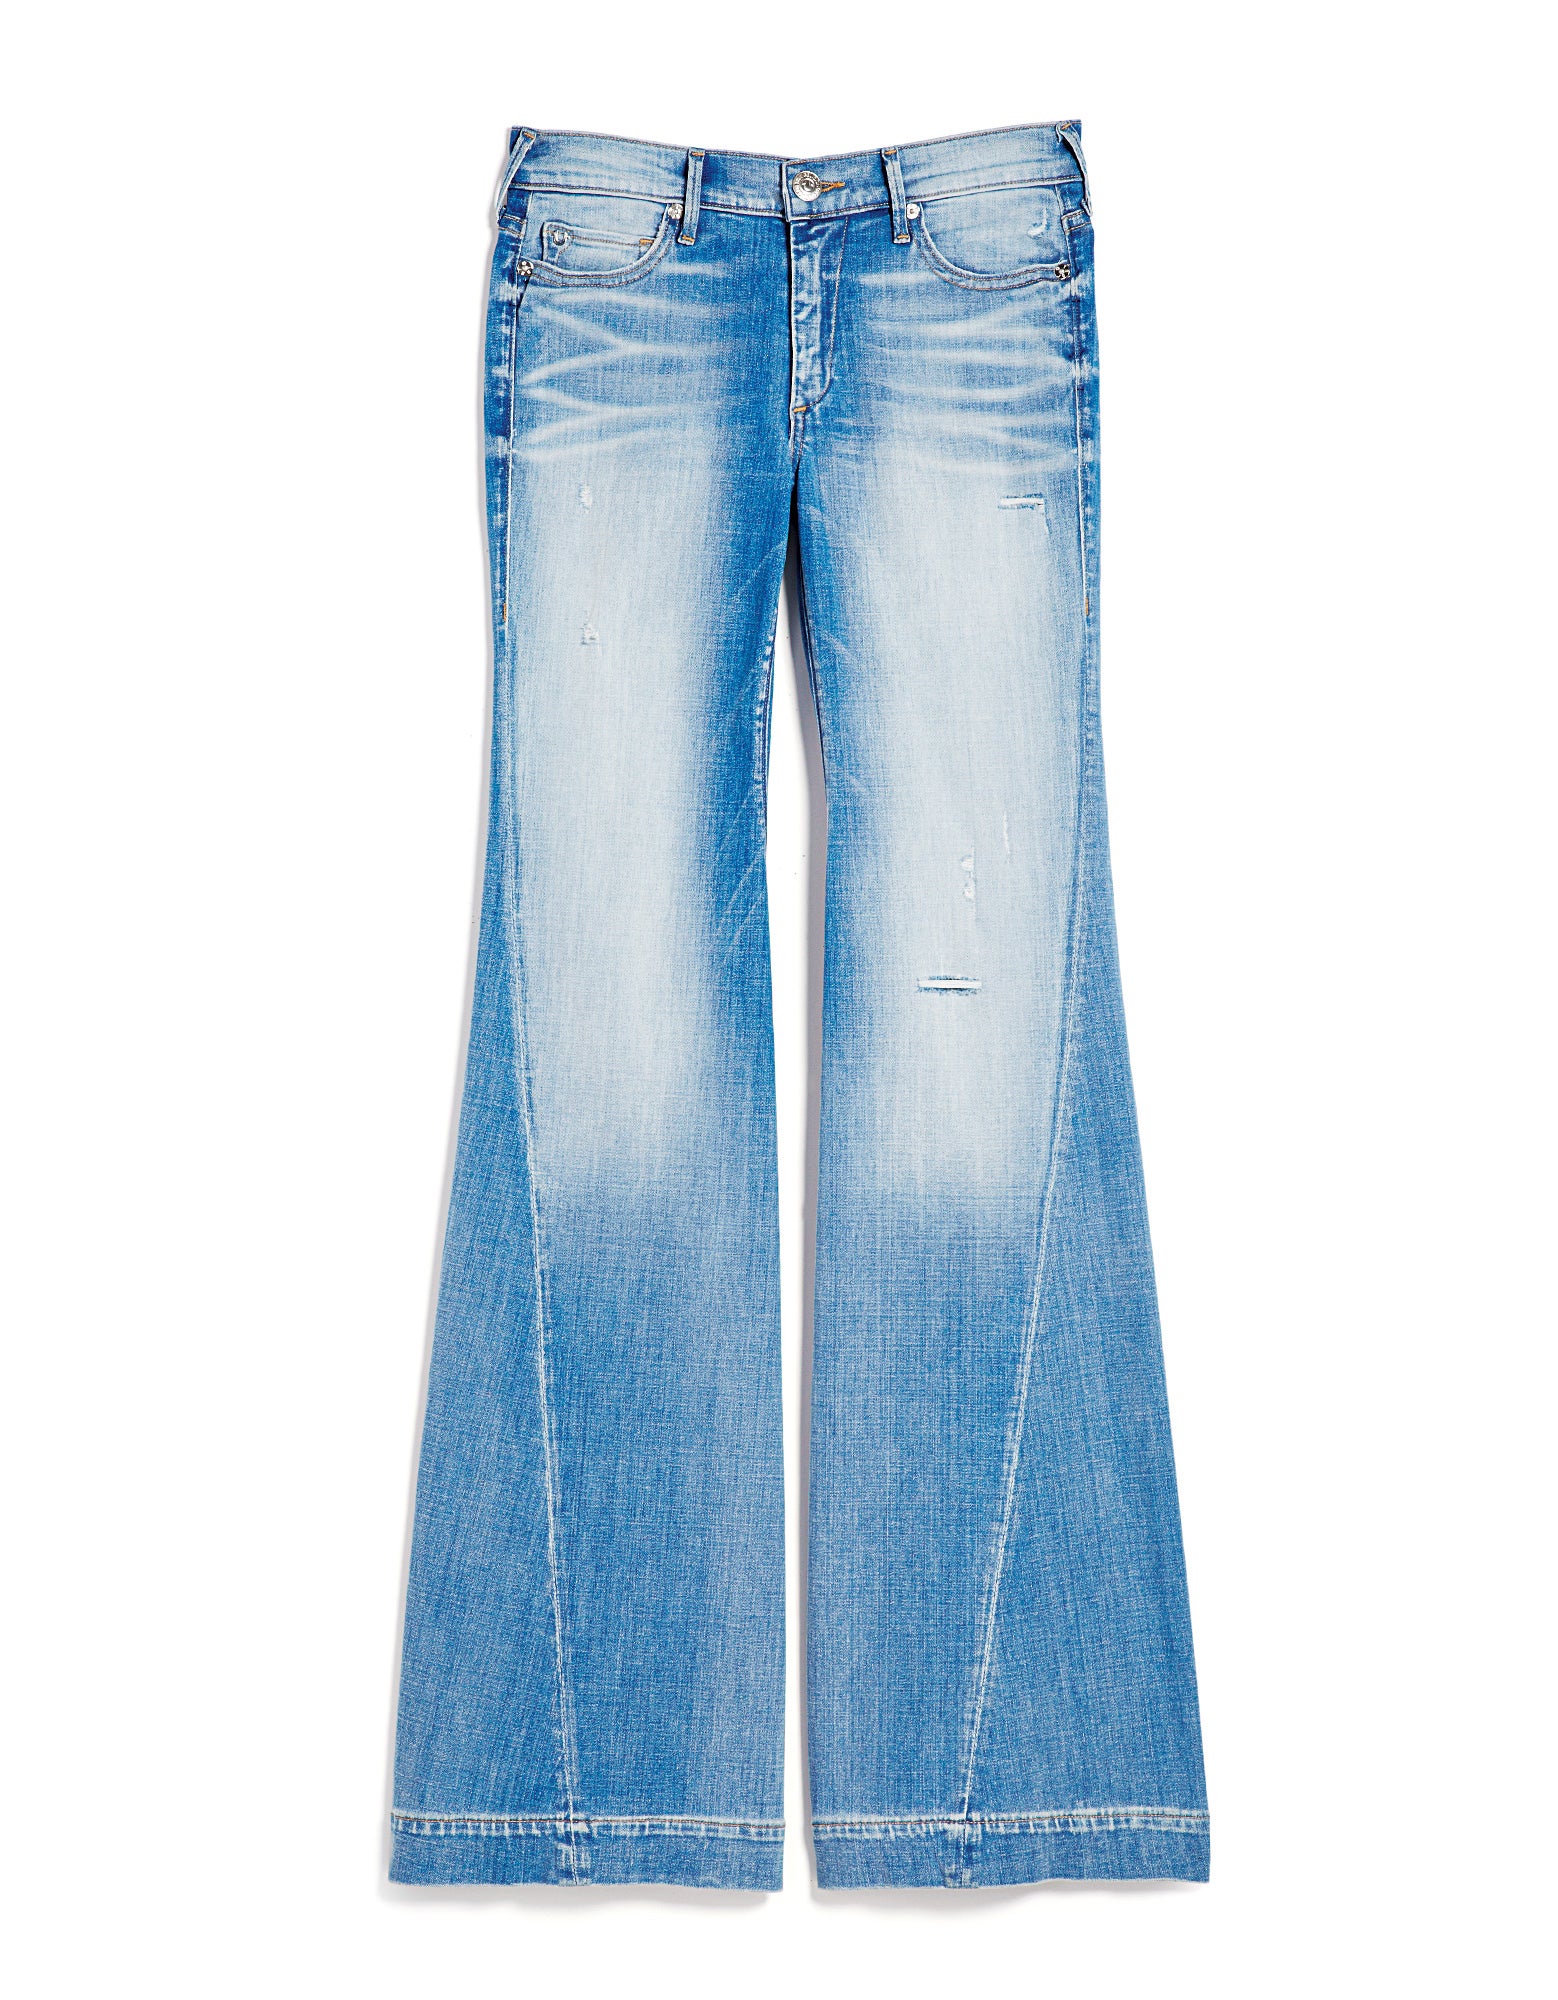 All About The Blues: ESSENCE’s Denim Guide